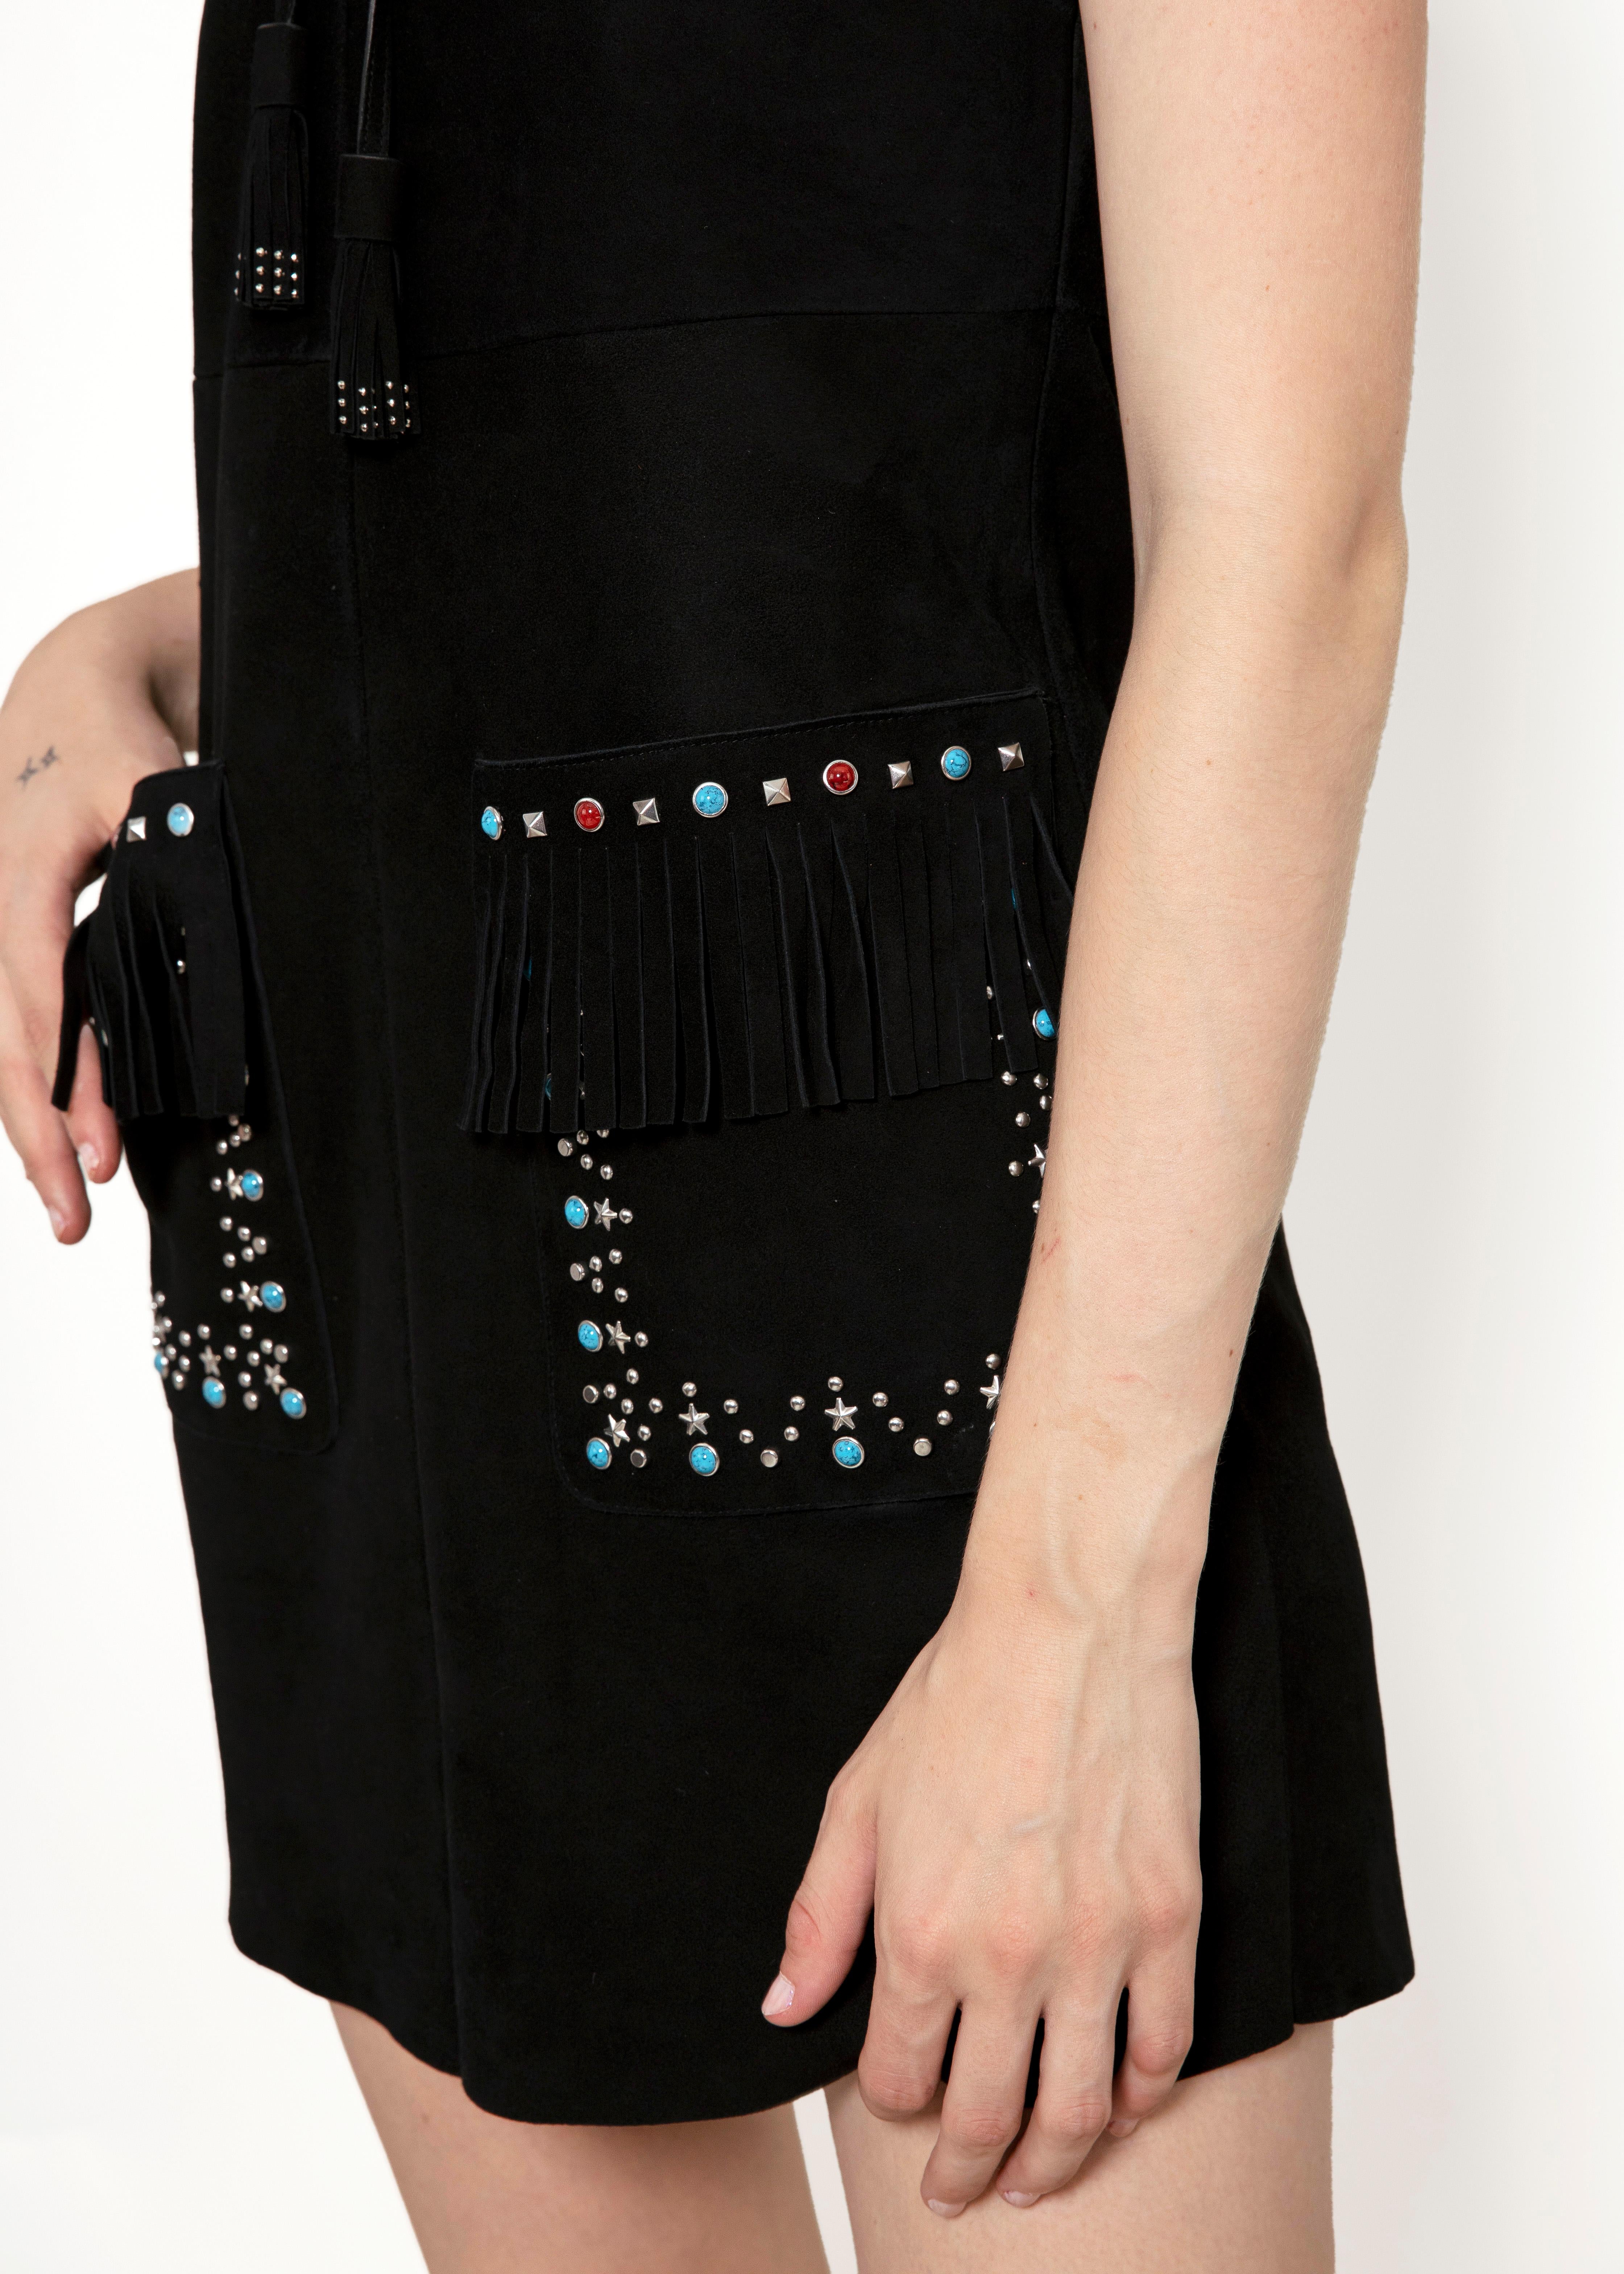 Be bold and daring in the Miu Miu Suede Beaded Dress. Featuring a lace-up design, this dress is adorned with turquoise and red star studs and jewels with fringe detail. Make a statement and stand out in this unique and eye-catching dress.
Condition: